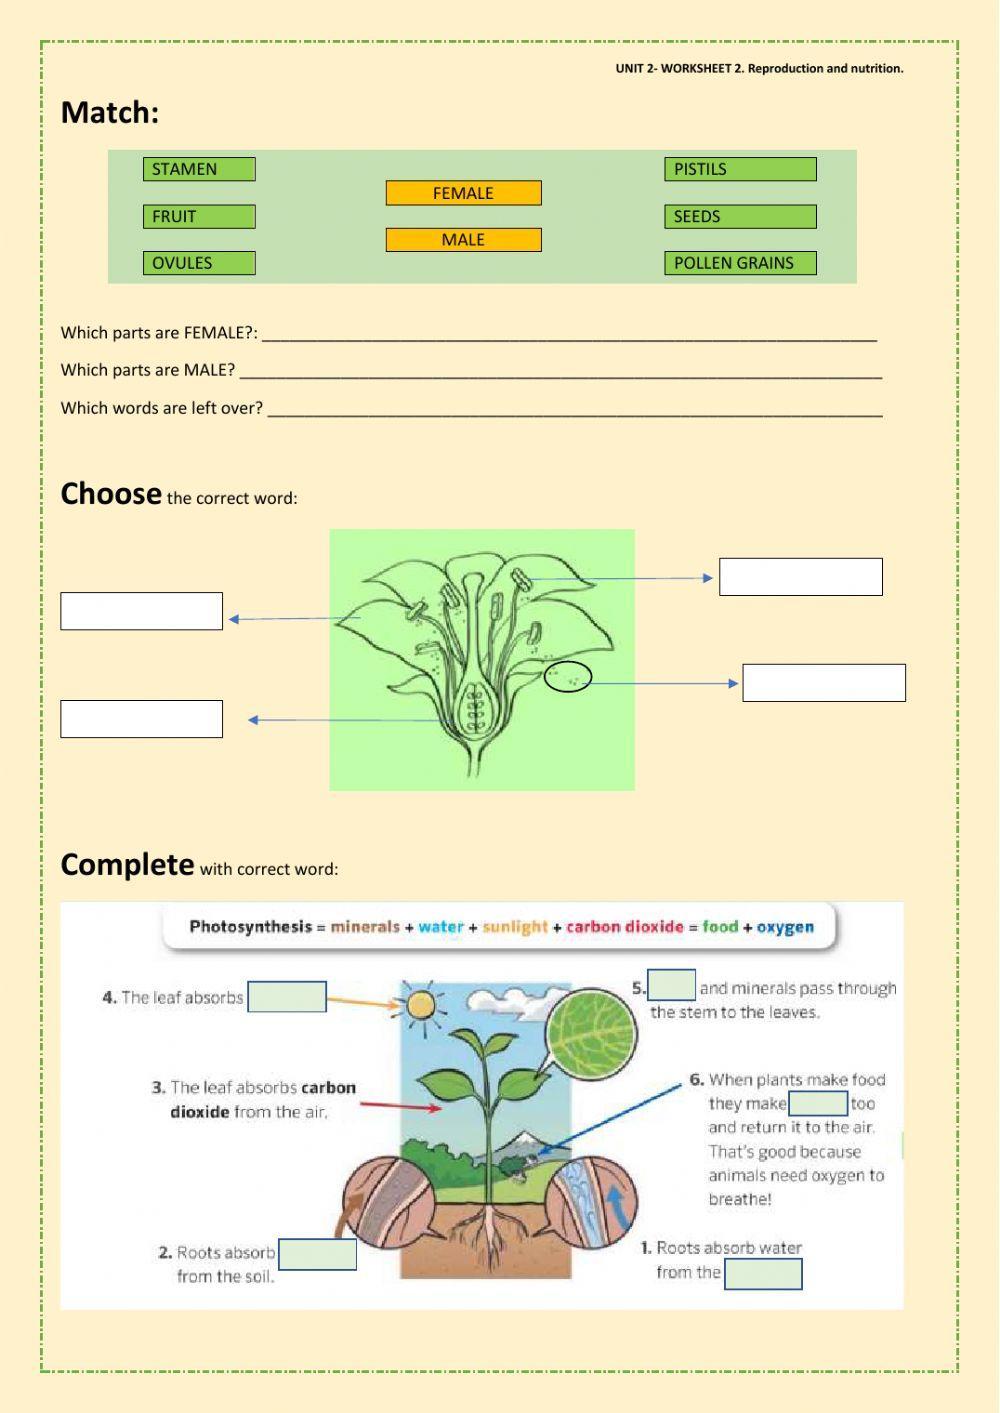 Nutrition and reproduction in plants.